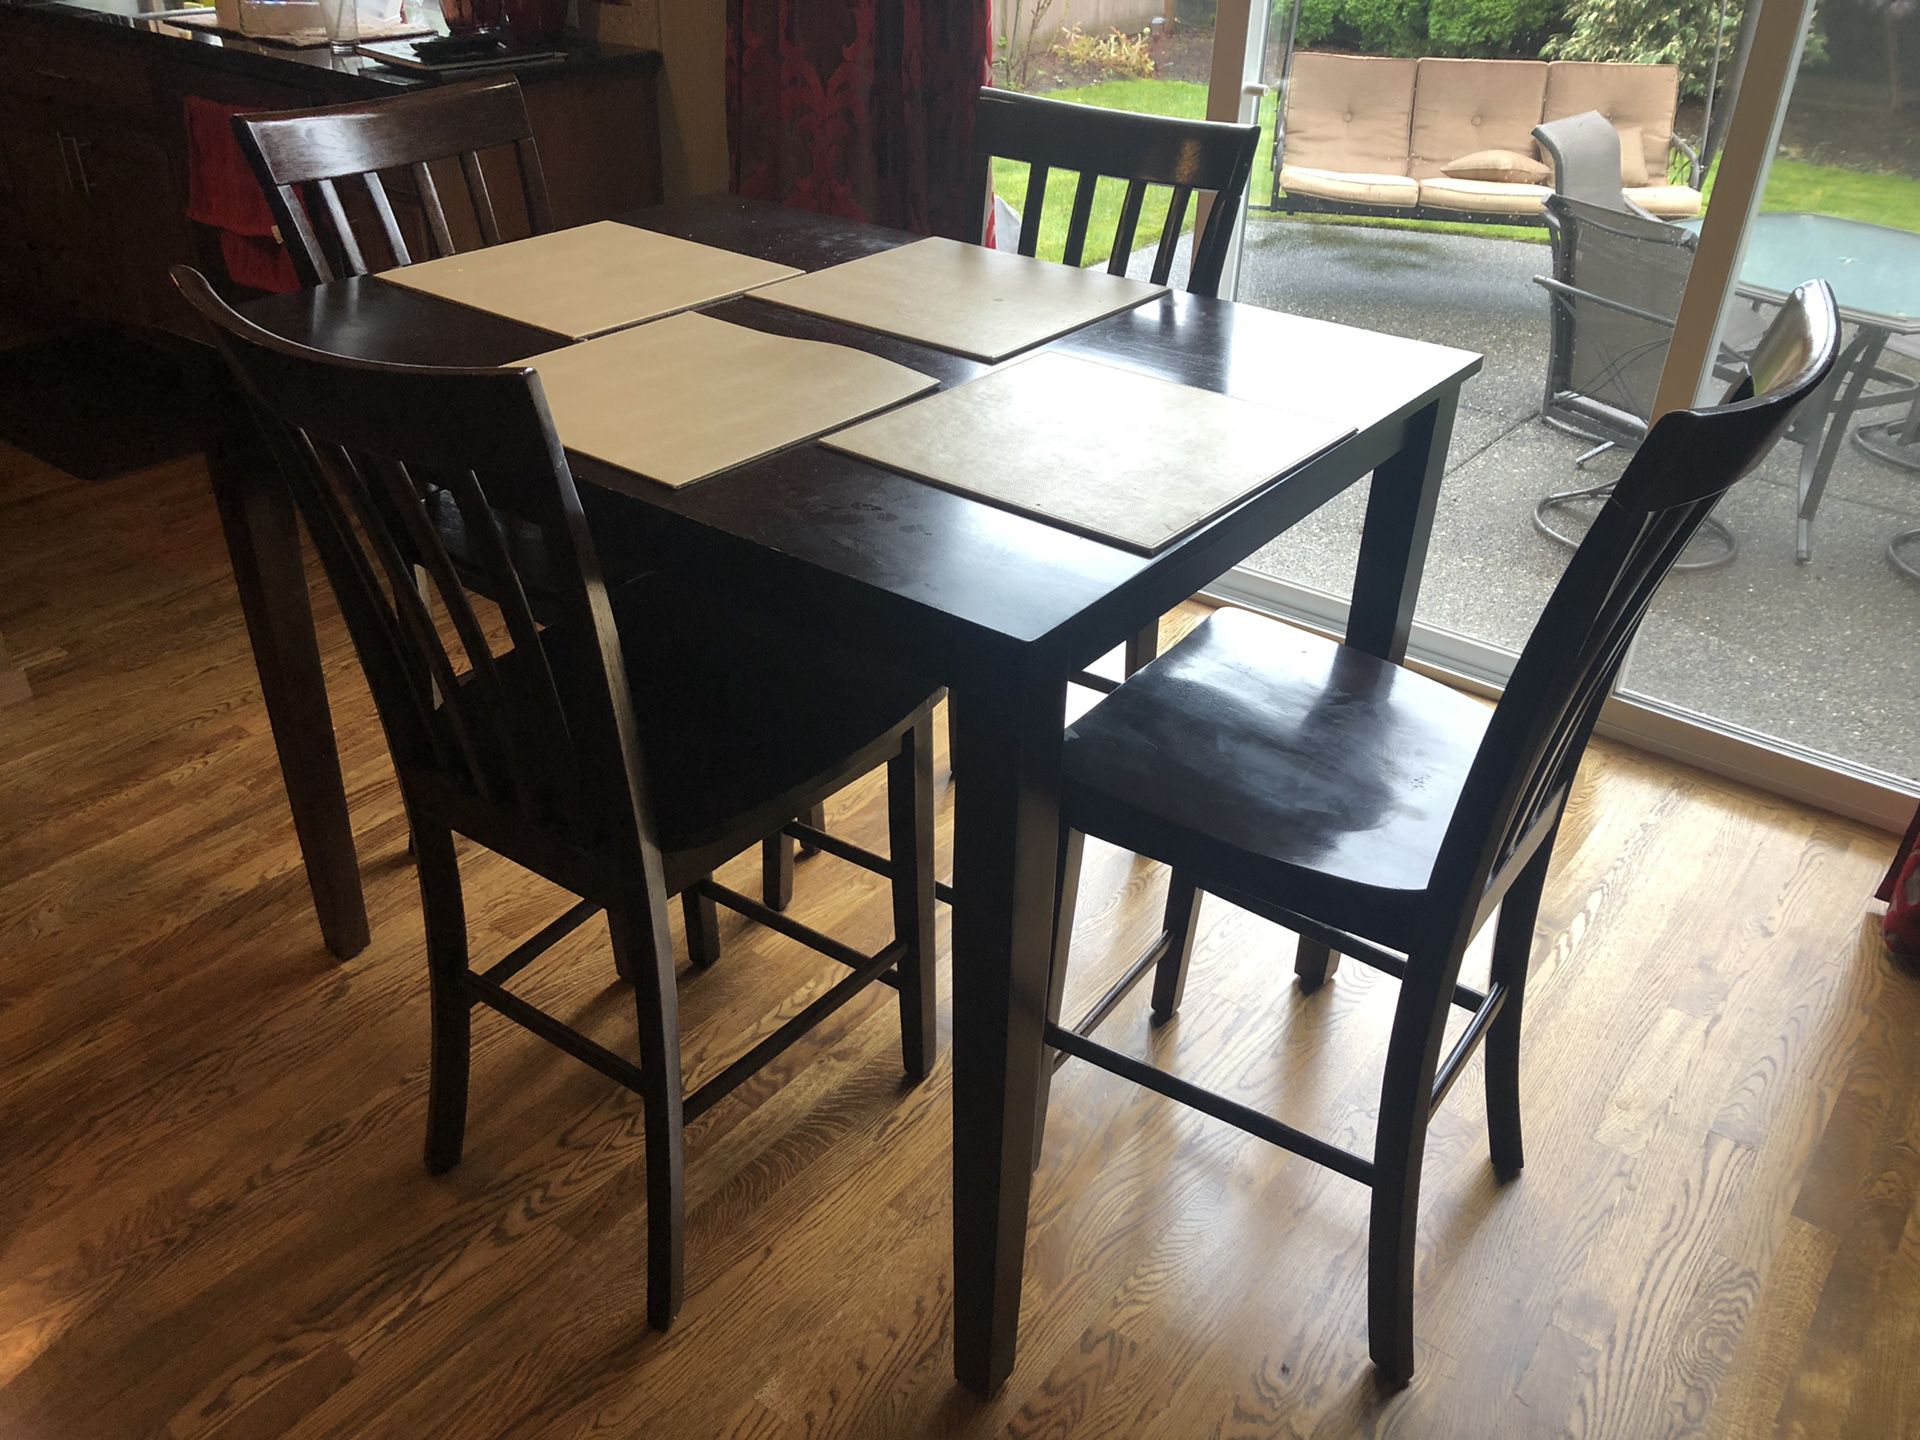 Nook table for 4